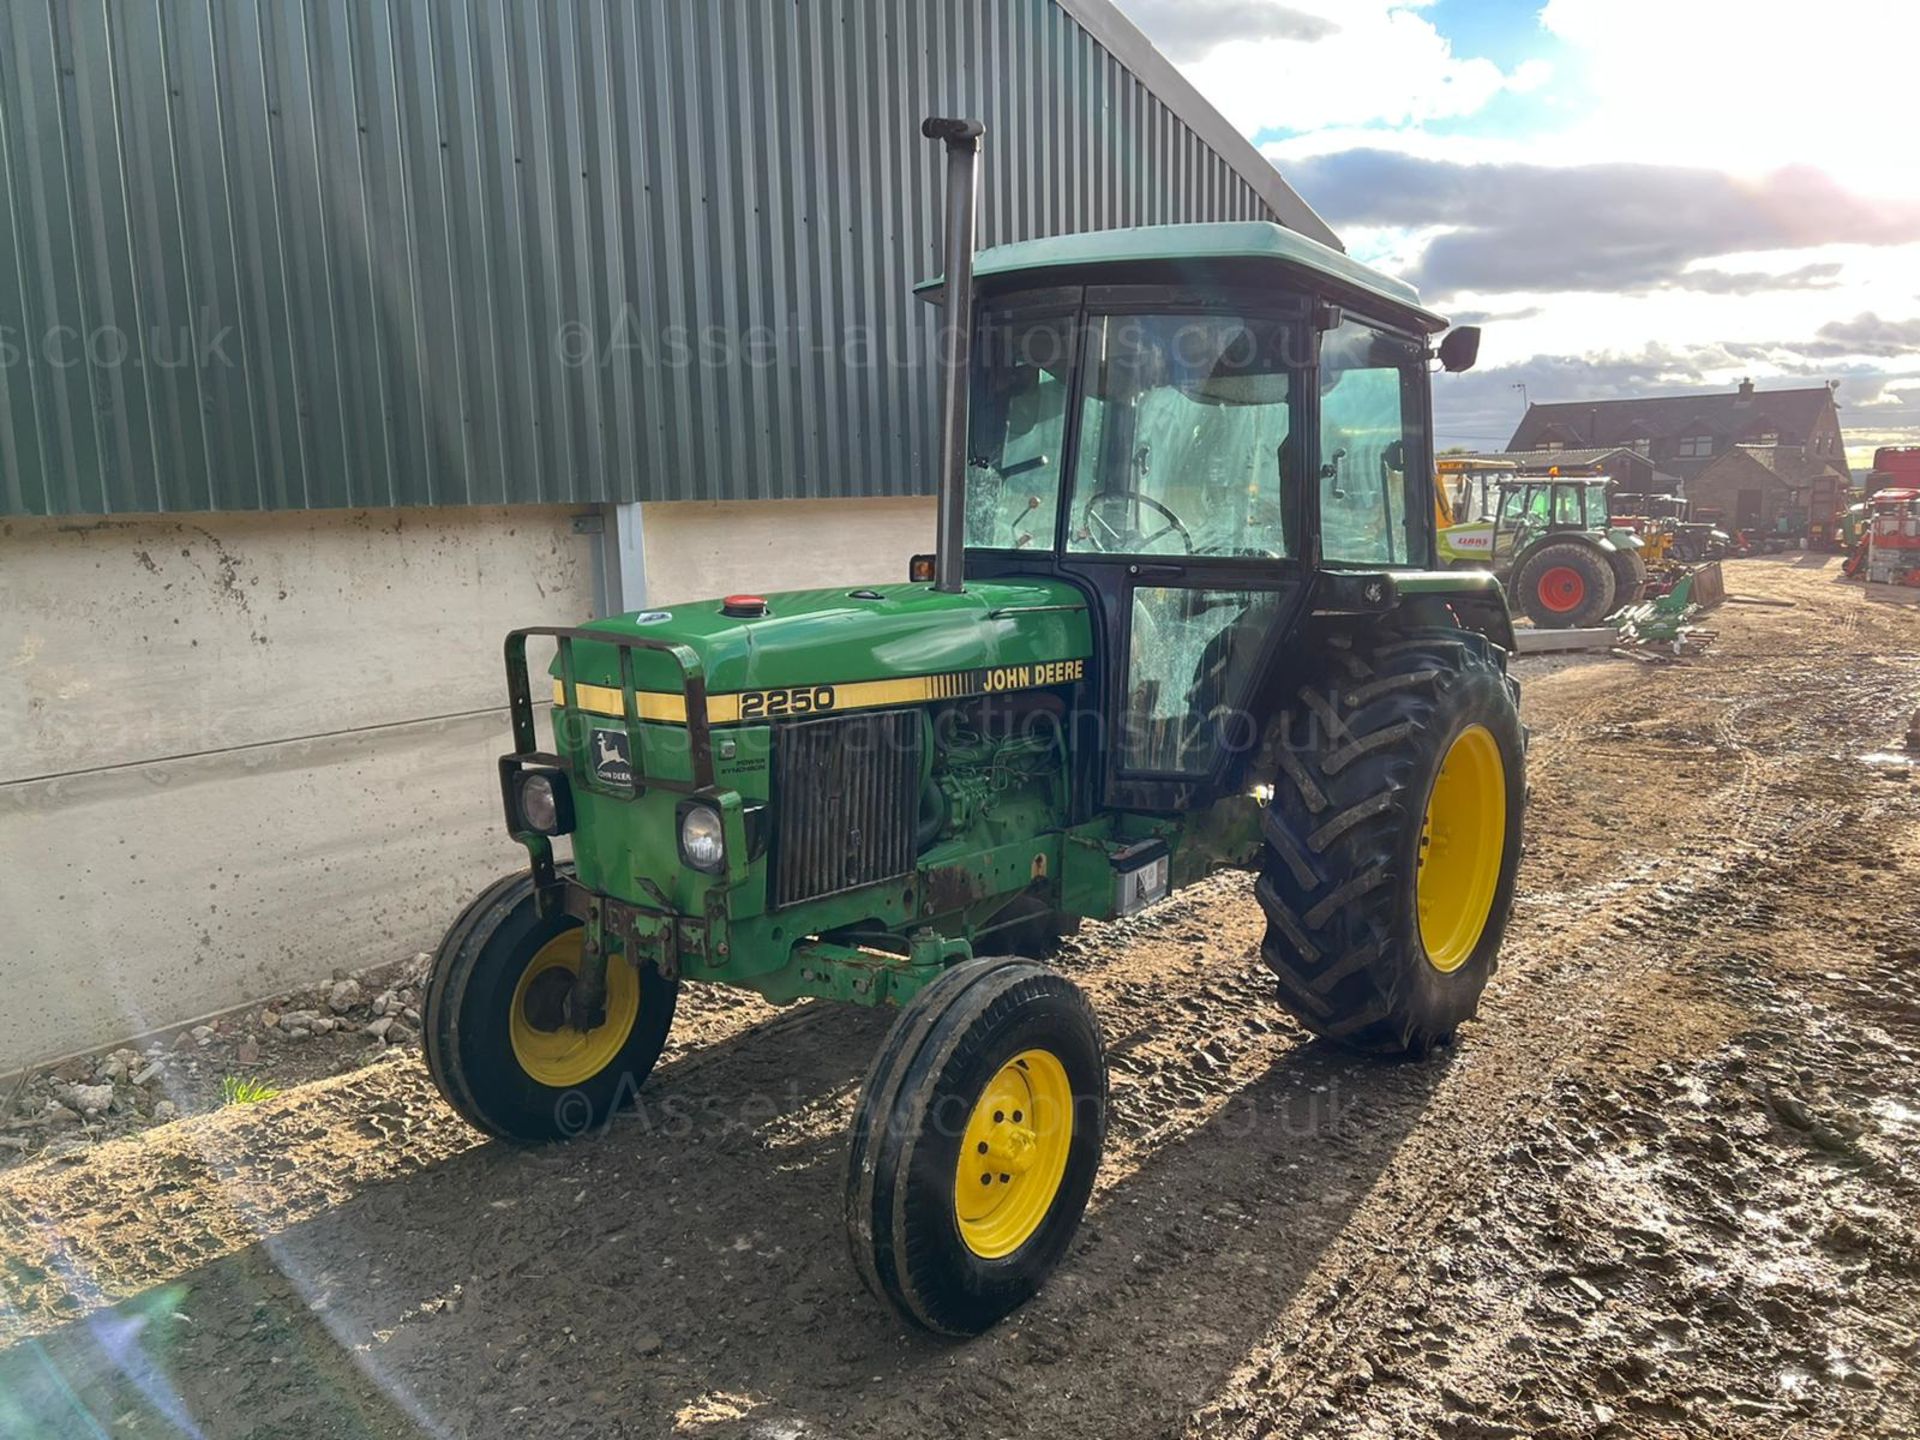 JOHN DEERE 2250 62hp TRACTOR, RUNS AND DRIVES, CABBED, 2 SPOOLS *PLUS VAT* - Image 2 of 11